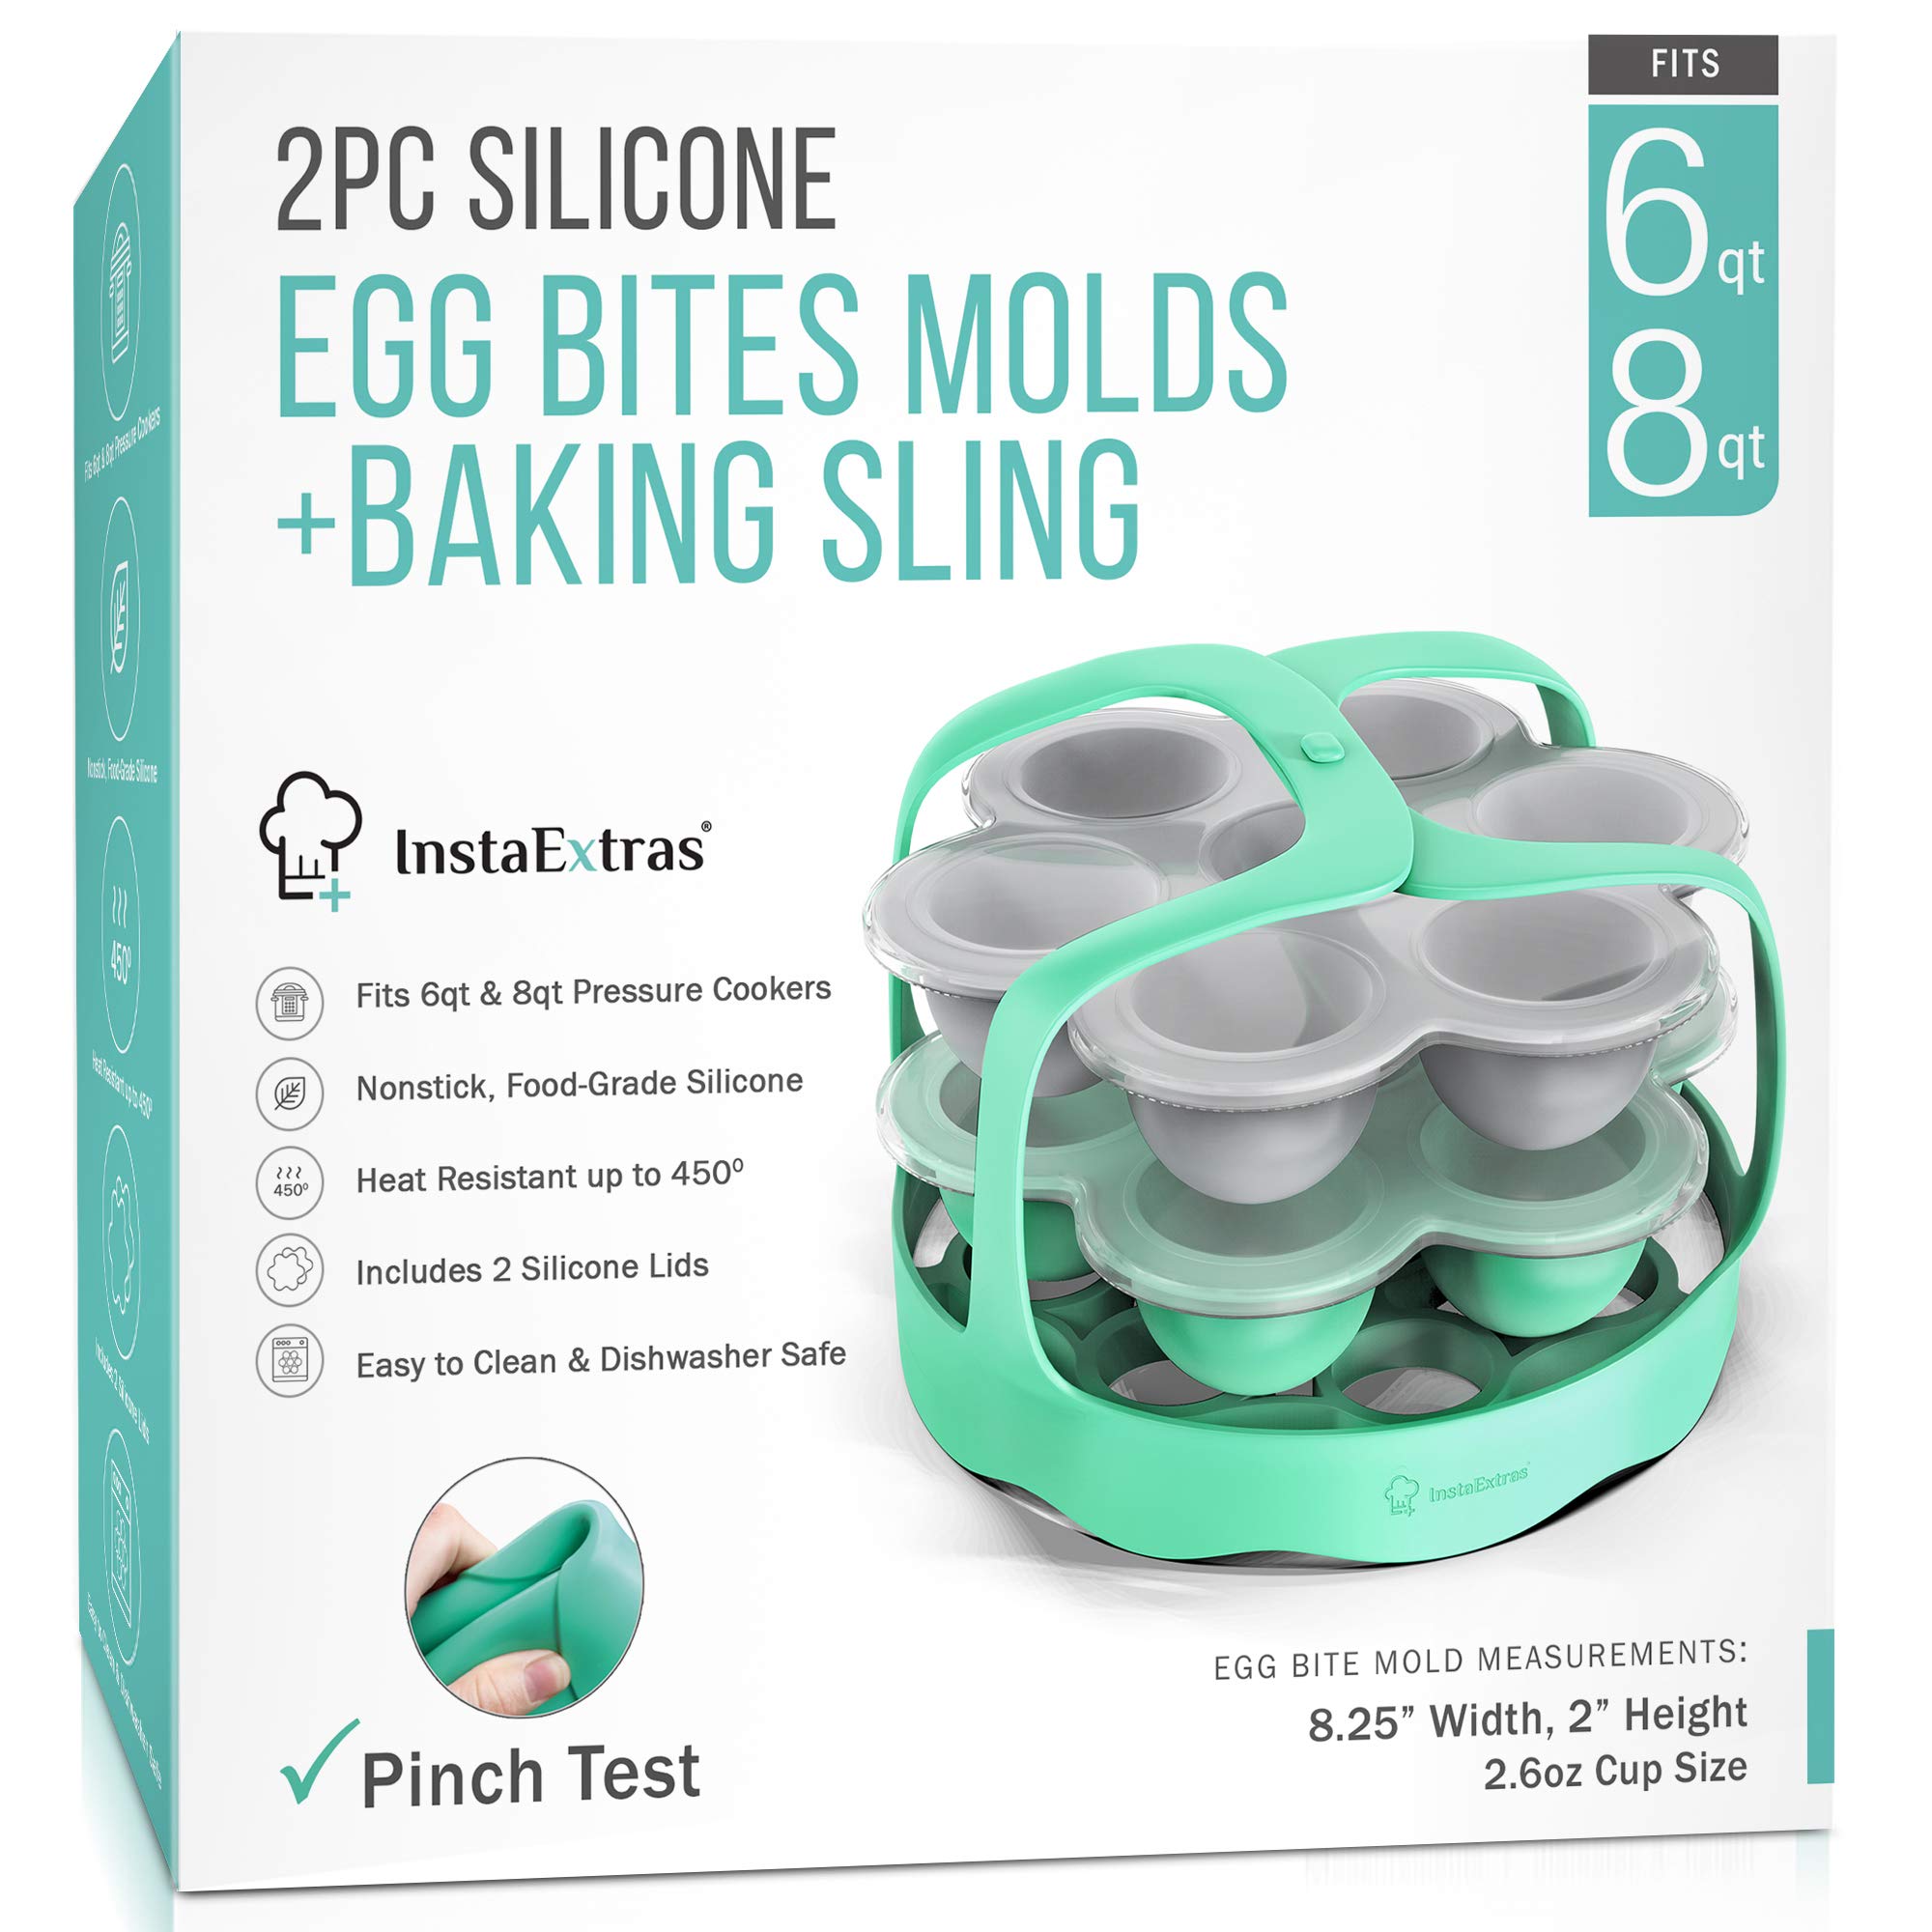 Book Cover Egg Bite Molds Compatible With Instant Pot, Ninja Foodi and Pressure Cookers 5-Qt 6-Qt 8-Qt - 2 Pack Set Silicone Mold, Lid, and Silicon Sling - Mould For Egg-Bites, Sous Vide, Eggbite Muffin